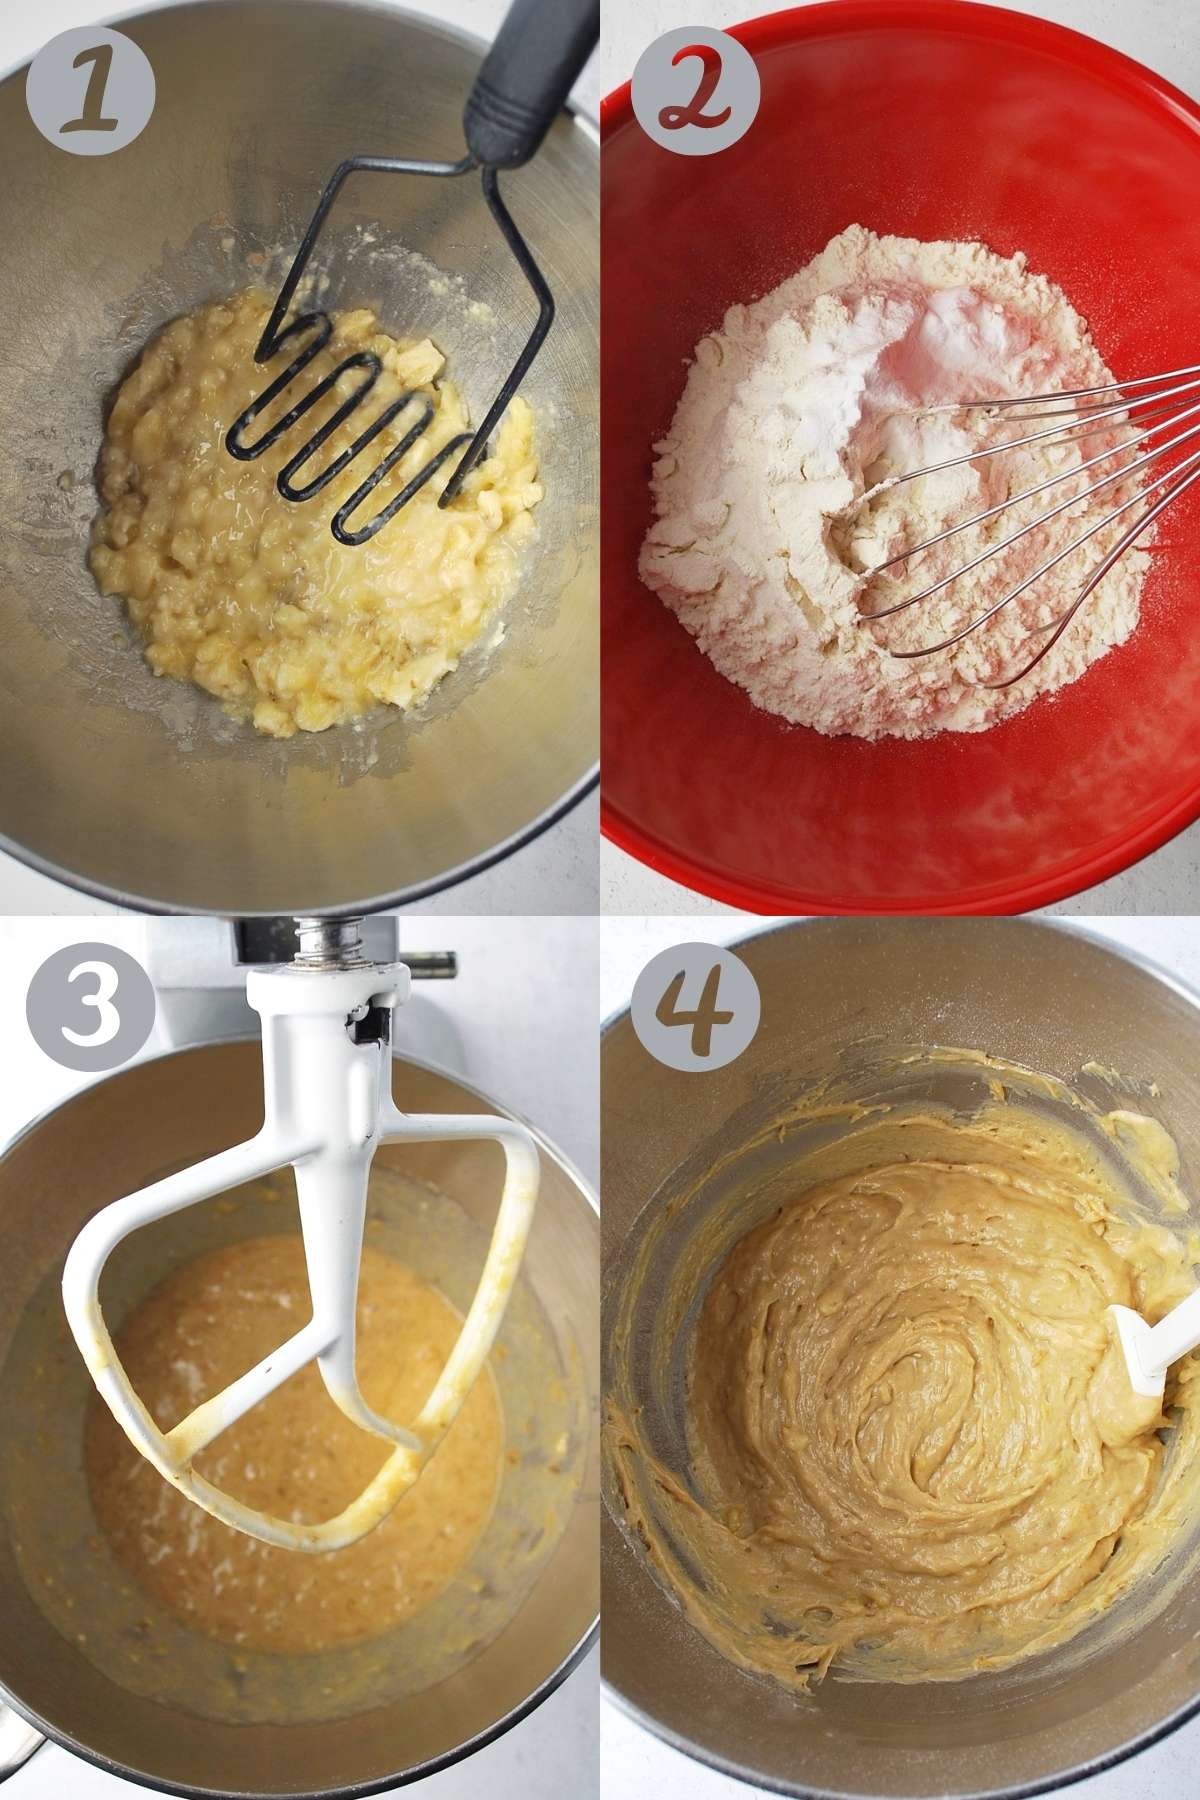 photos of steps for making banana nutella muffins